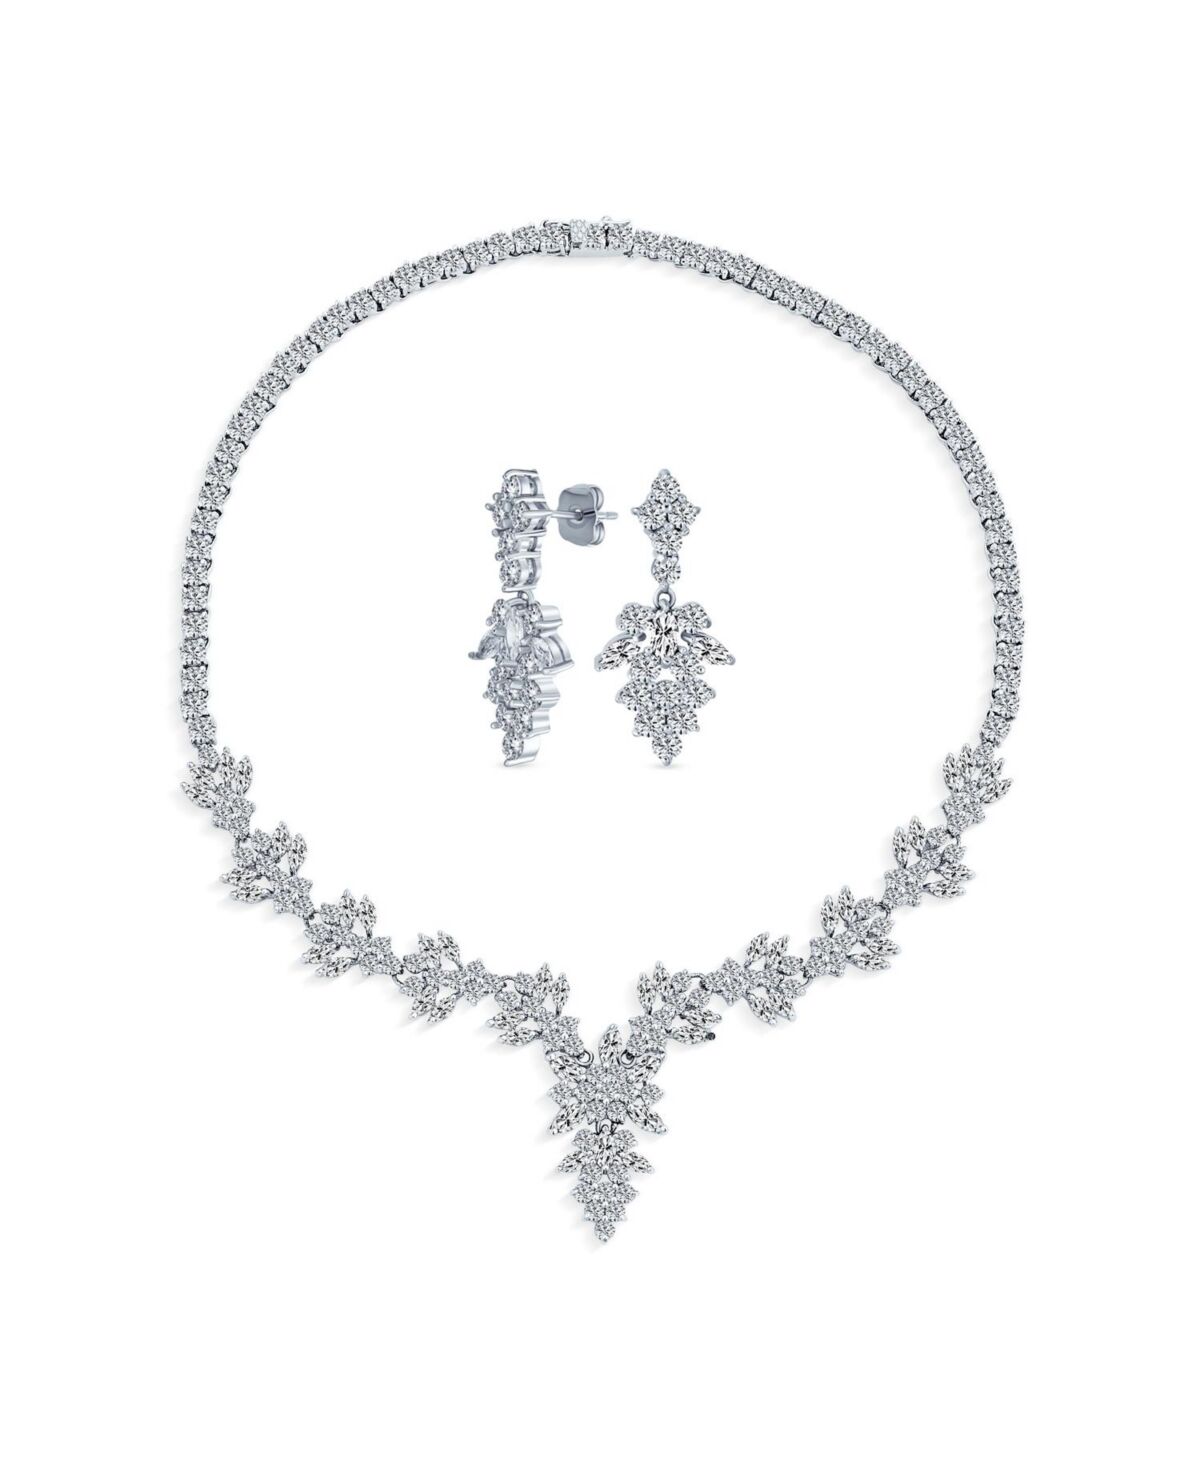 Bling Jewelry Art Deco Style Marquise Leaf Starburst Cubic Zirconia Aaa Cz Statement Collar V Necklace & Chandelier Dangle Earrings Bridal Jewelry Set